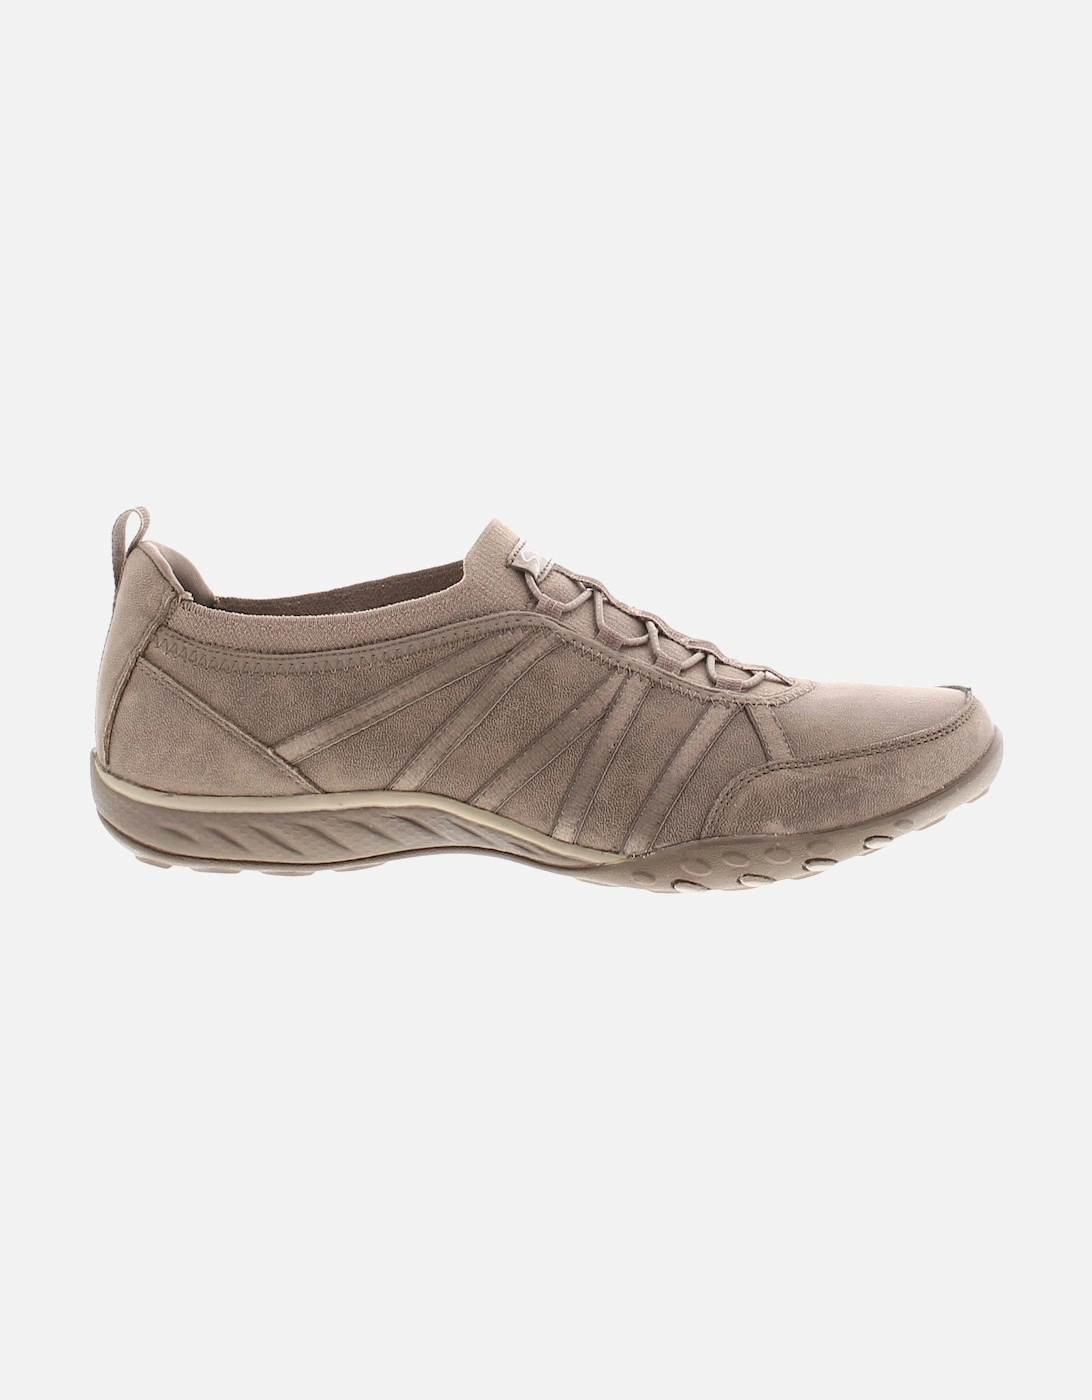 Womens Trainers Breathe Easy Remember Me Lace Up dark taupe UK Size